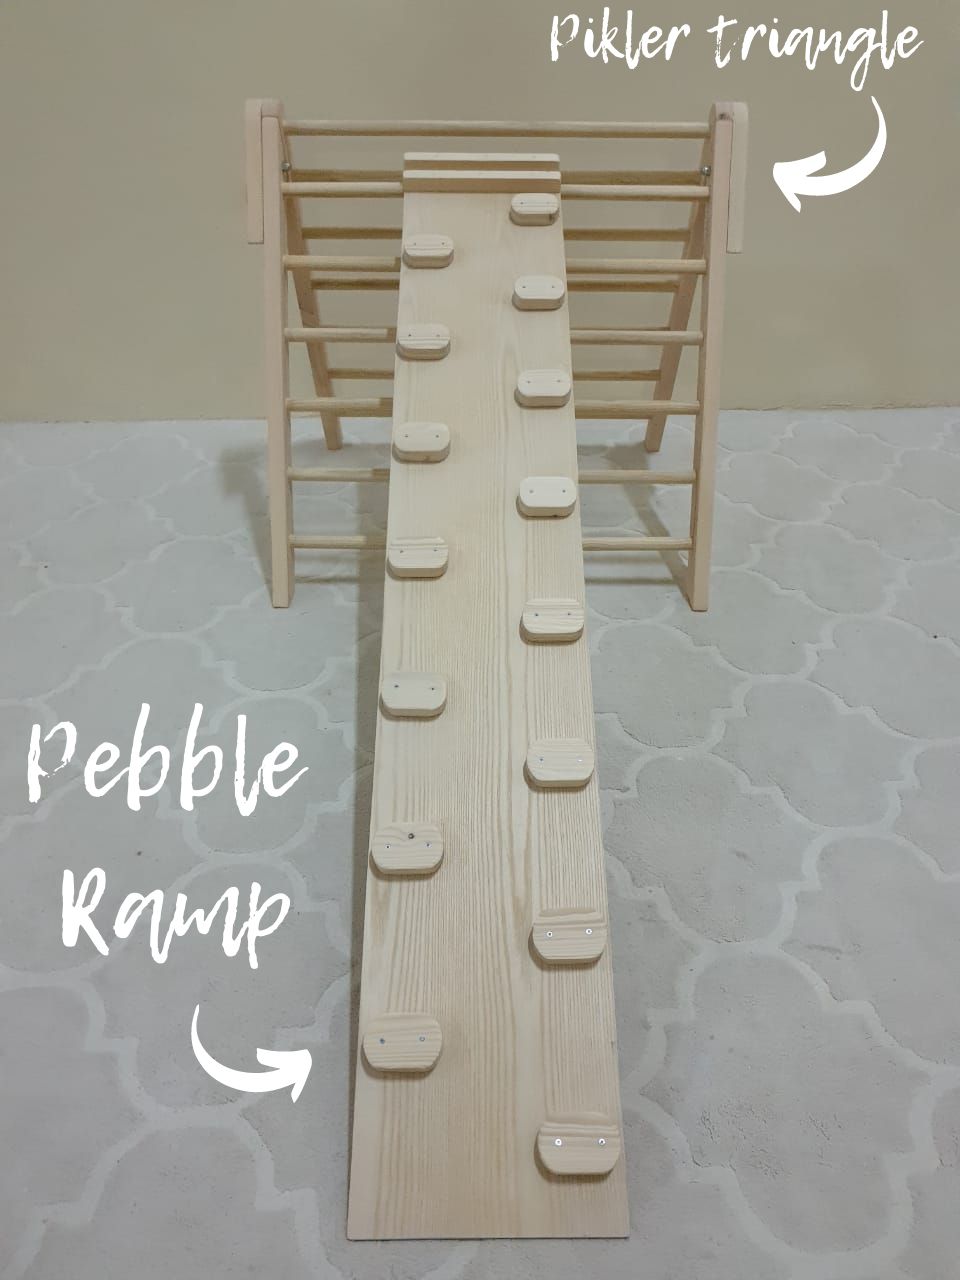 Pikler triangle add on: Pebble Ramp